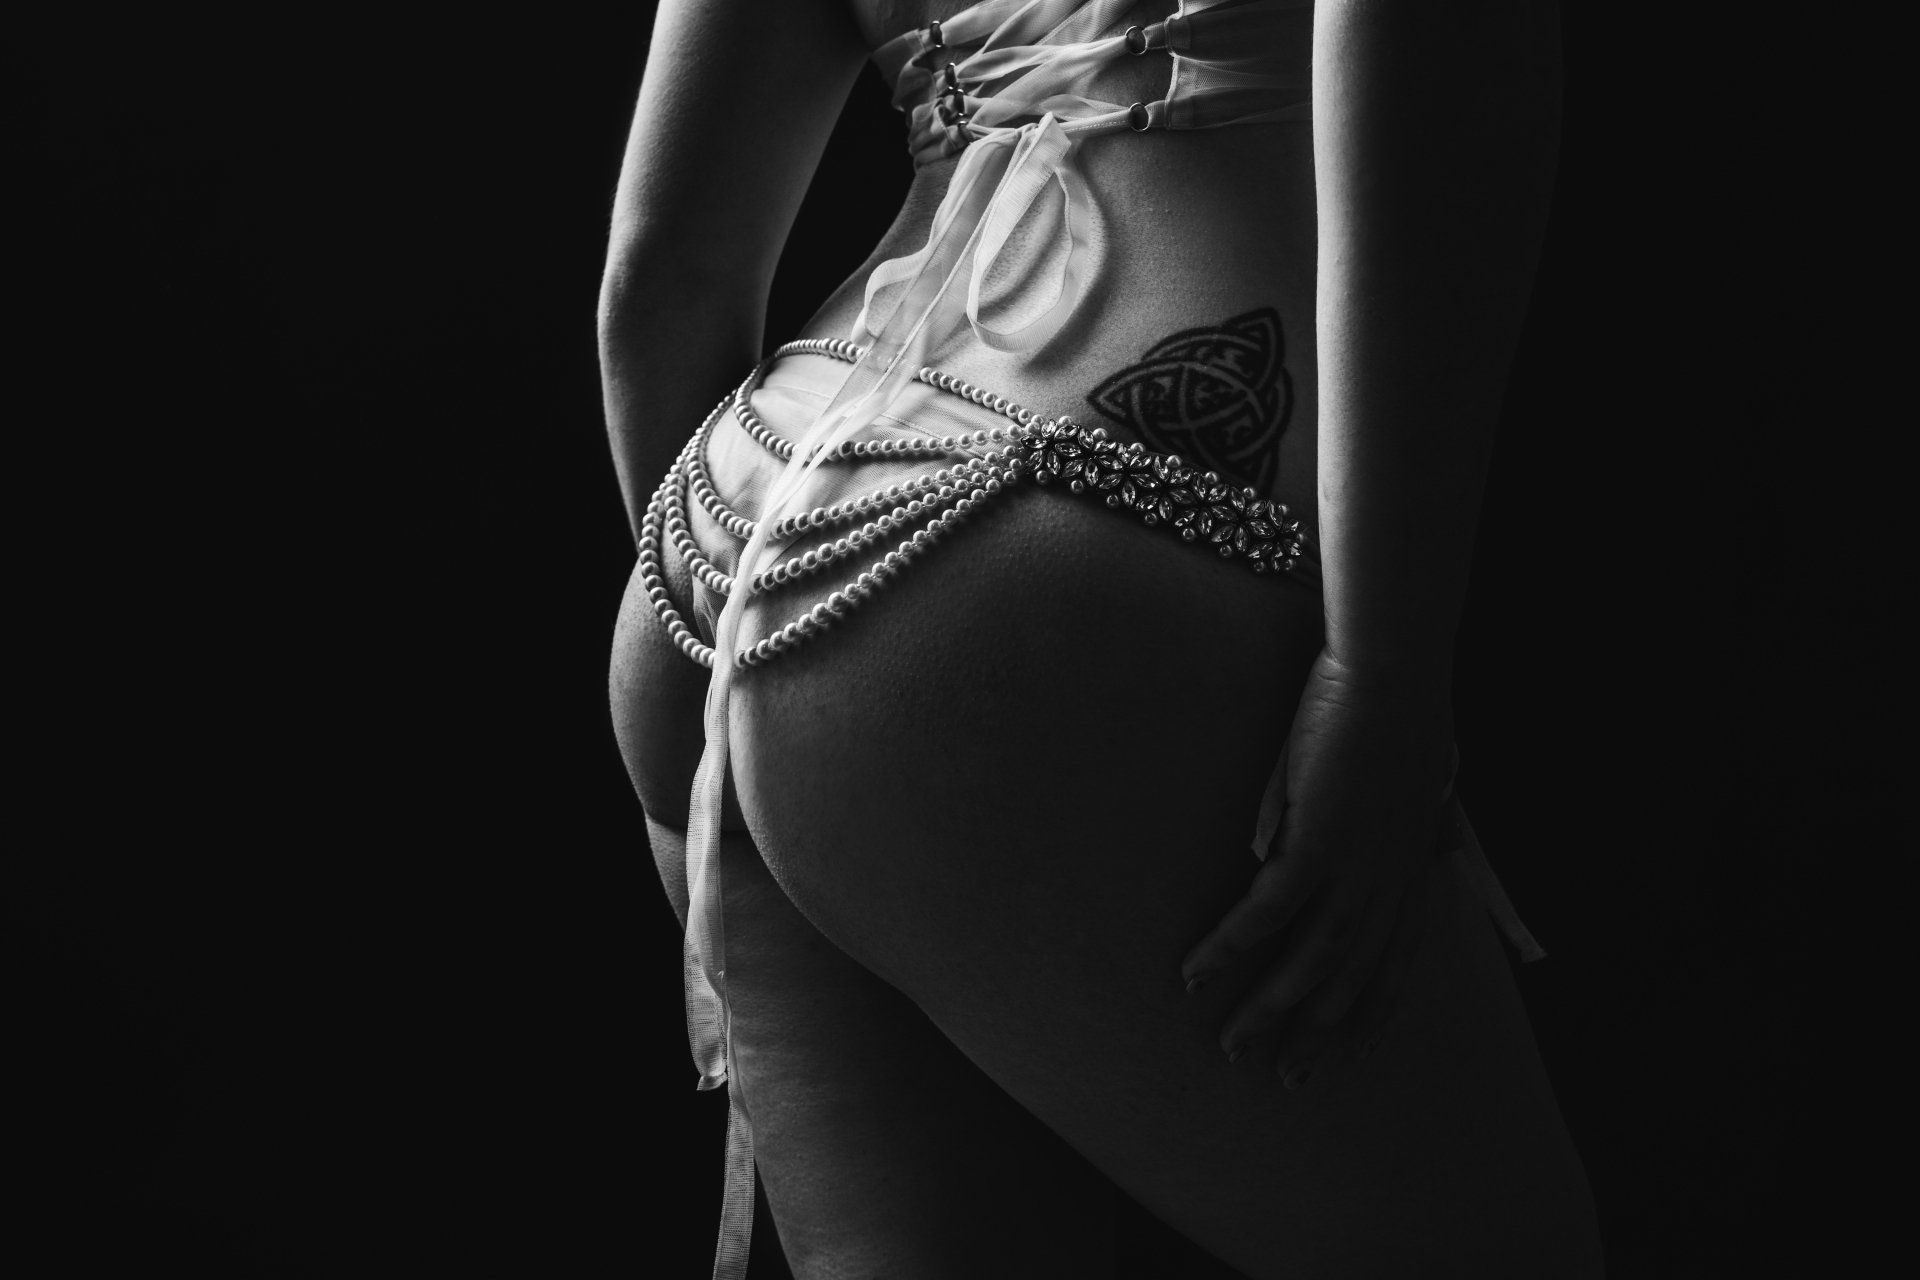 A woman wearing pearls over her buttocks.